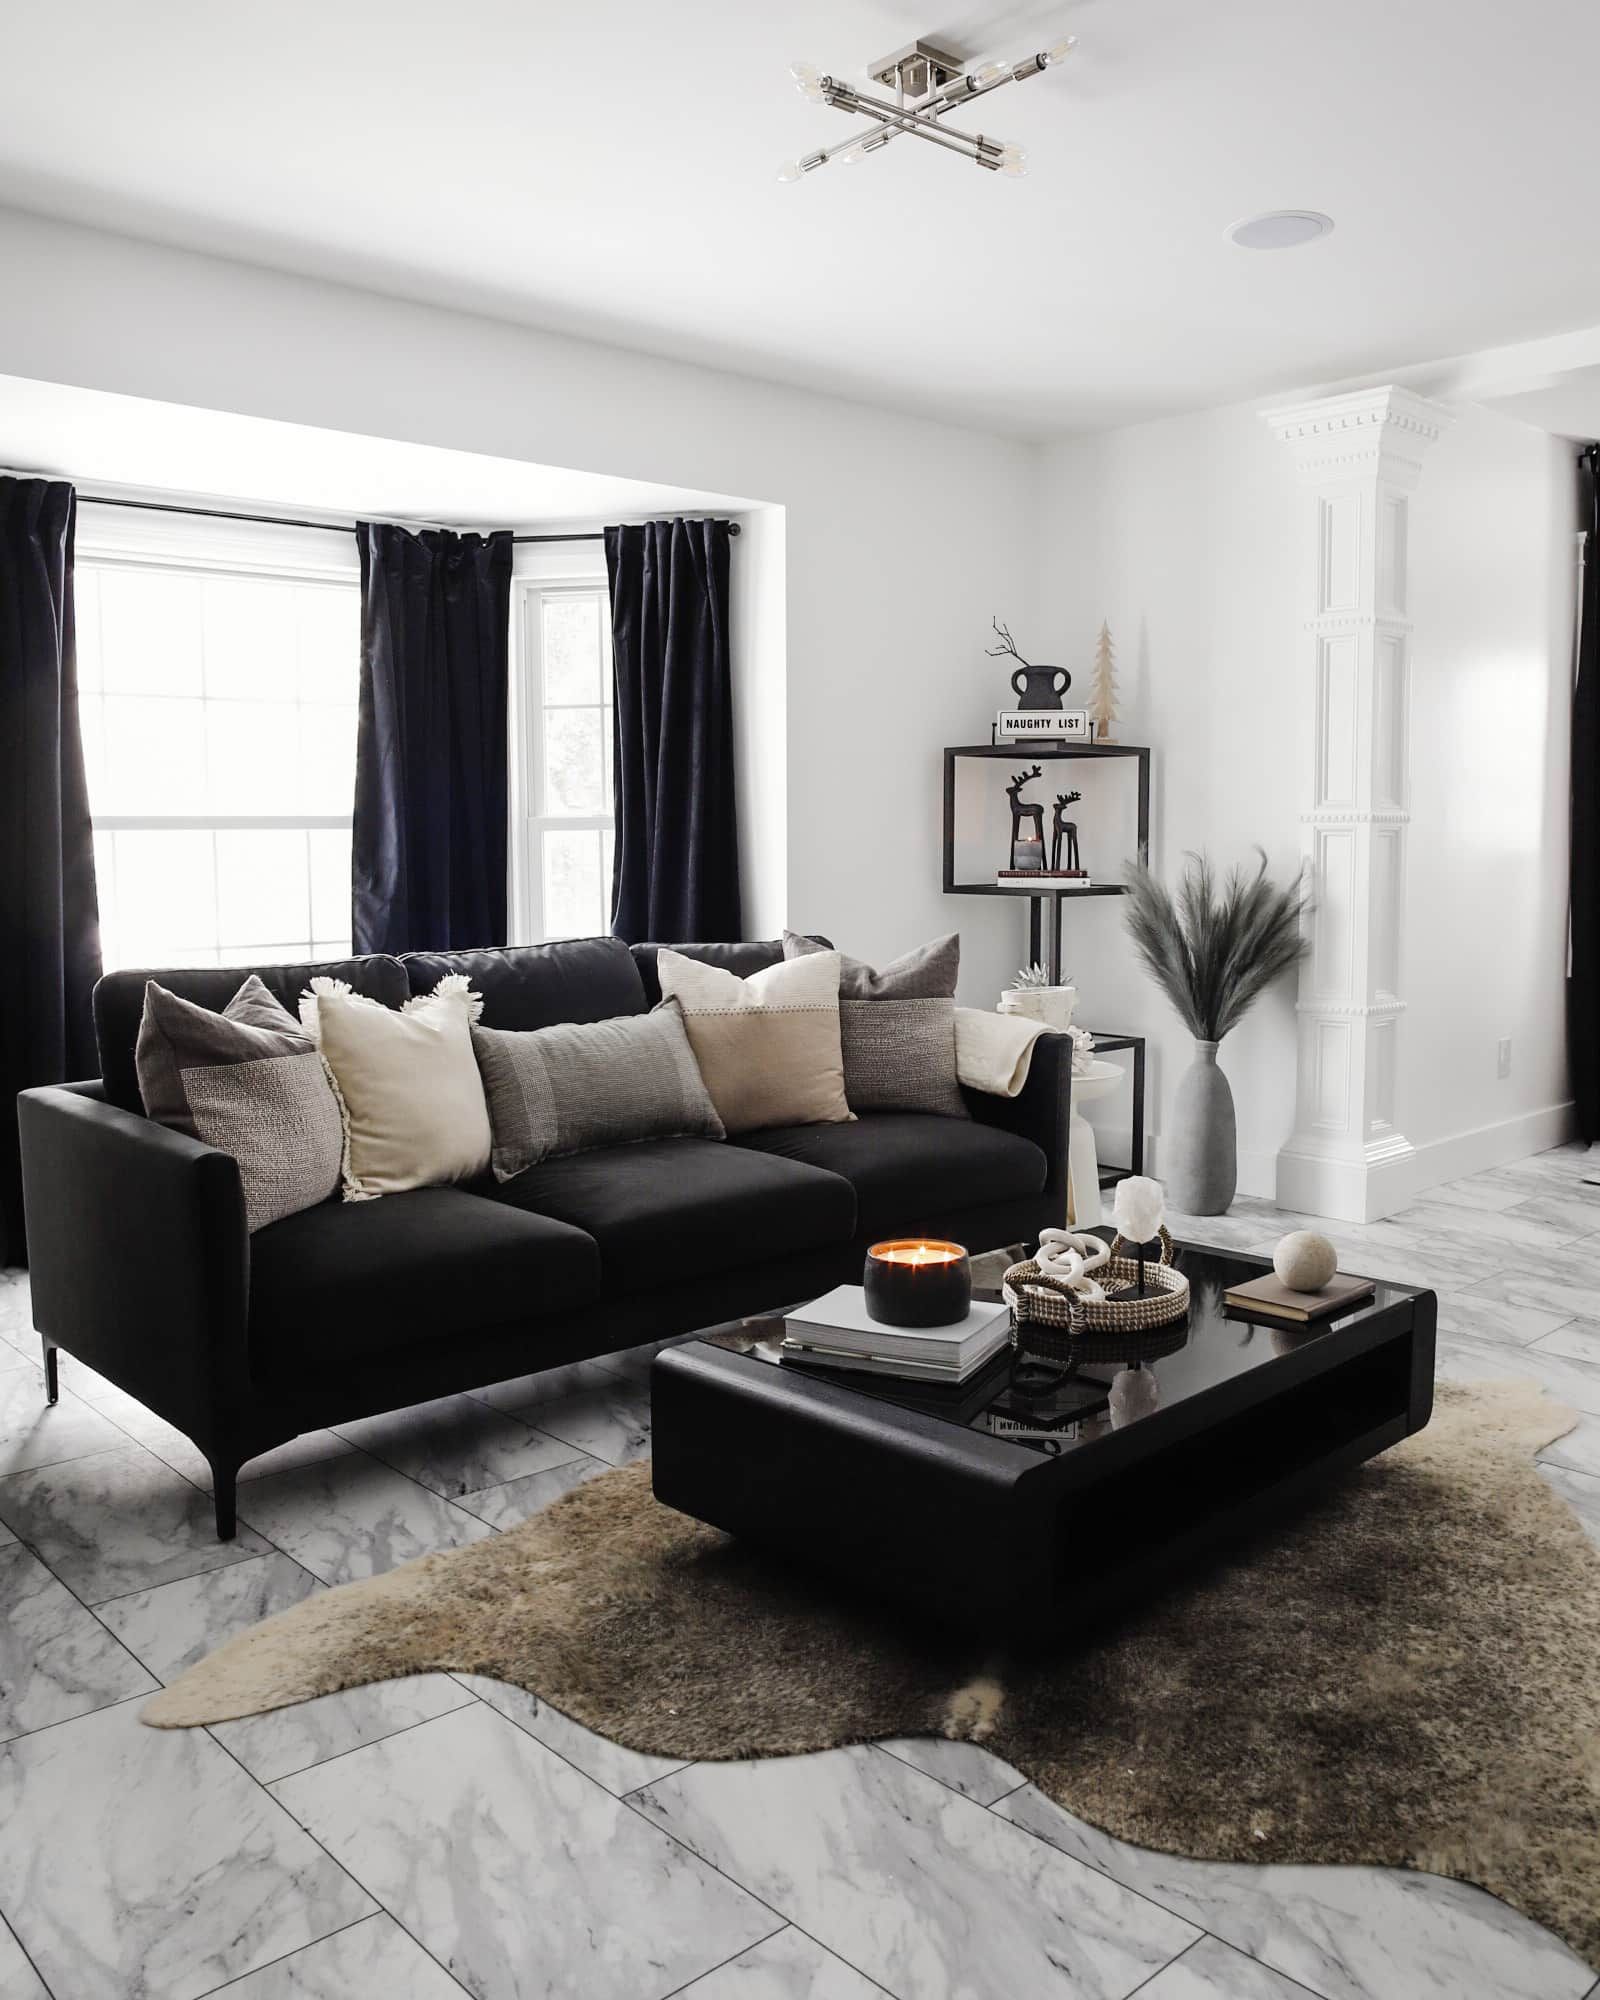 How To Style A Black Sofa | Castlery Us Throughout Sofas In Black (View 2 of 15)